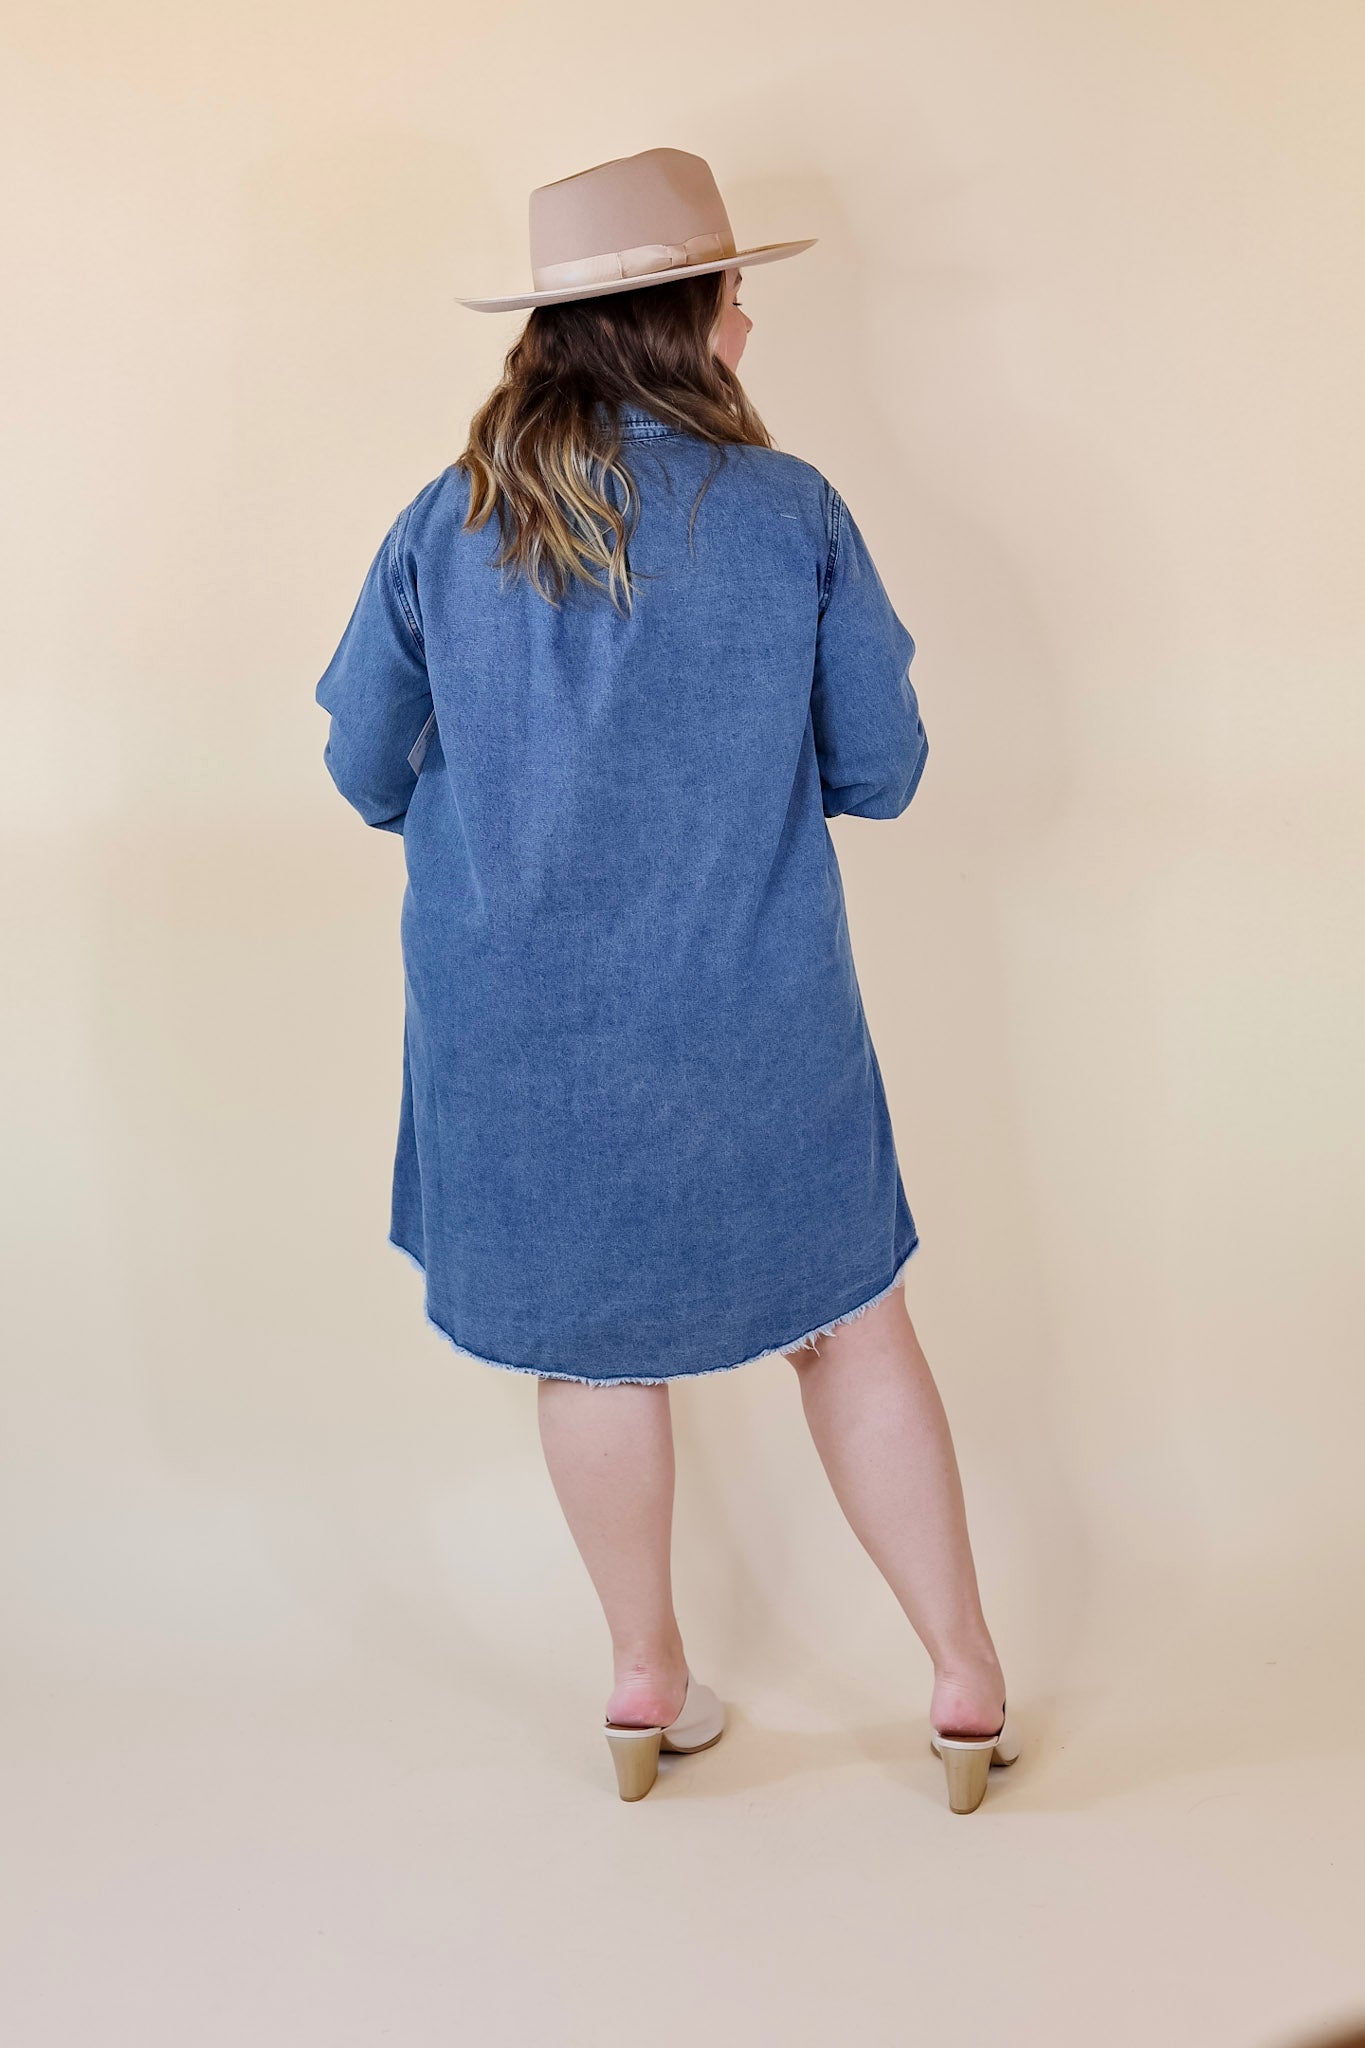 Patio Date Button Up Long Sleeve Denim Dress in Medium Wash - Giddy Up Glamour Boutique